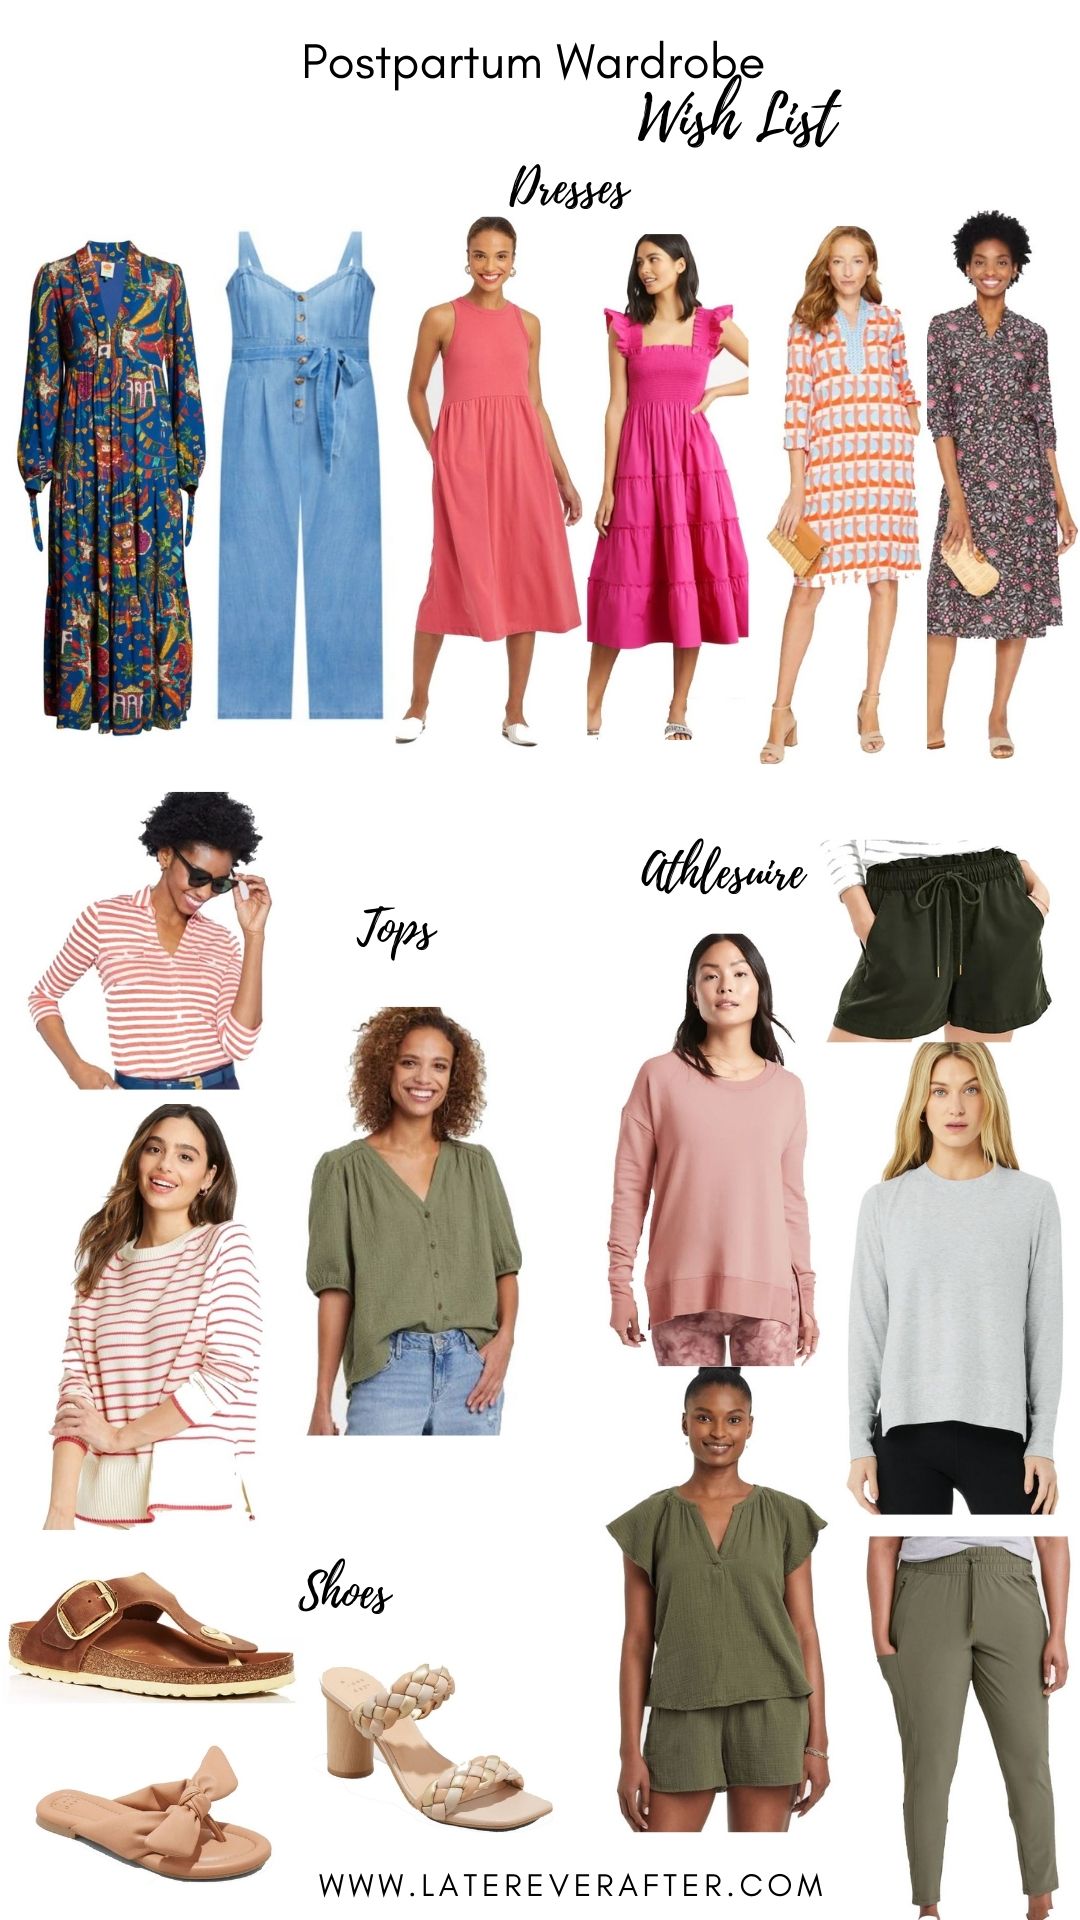 Postpartum Style: How to Rediscover Your Personal Style After